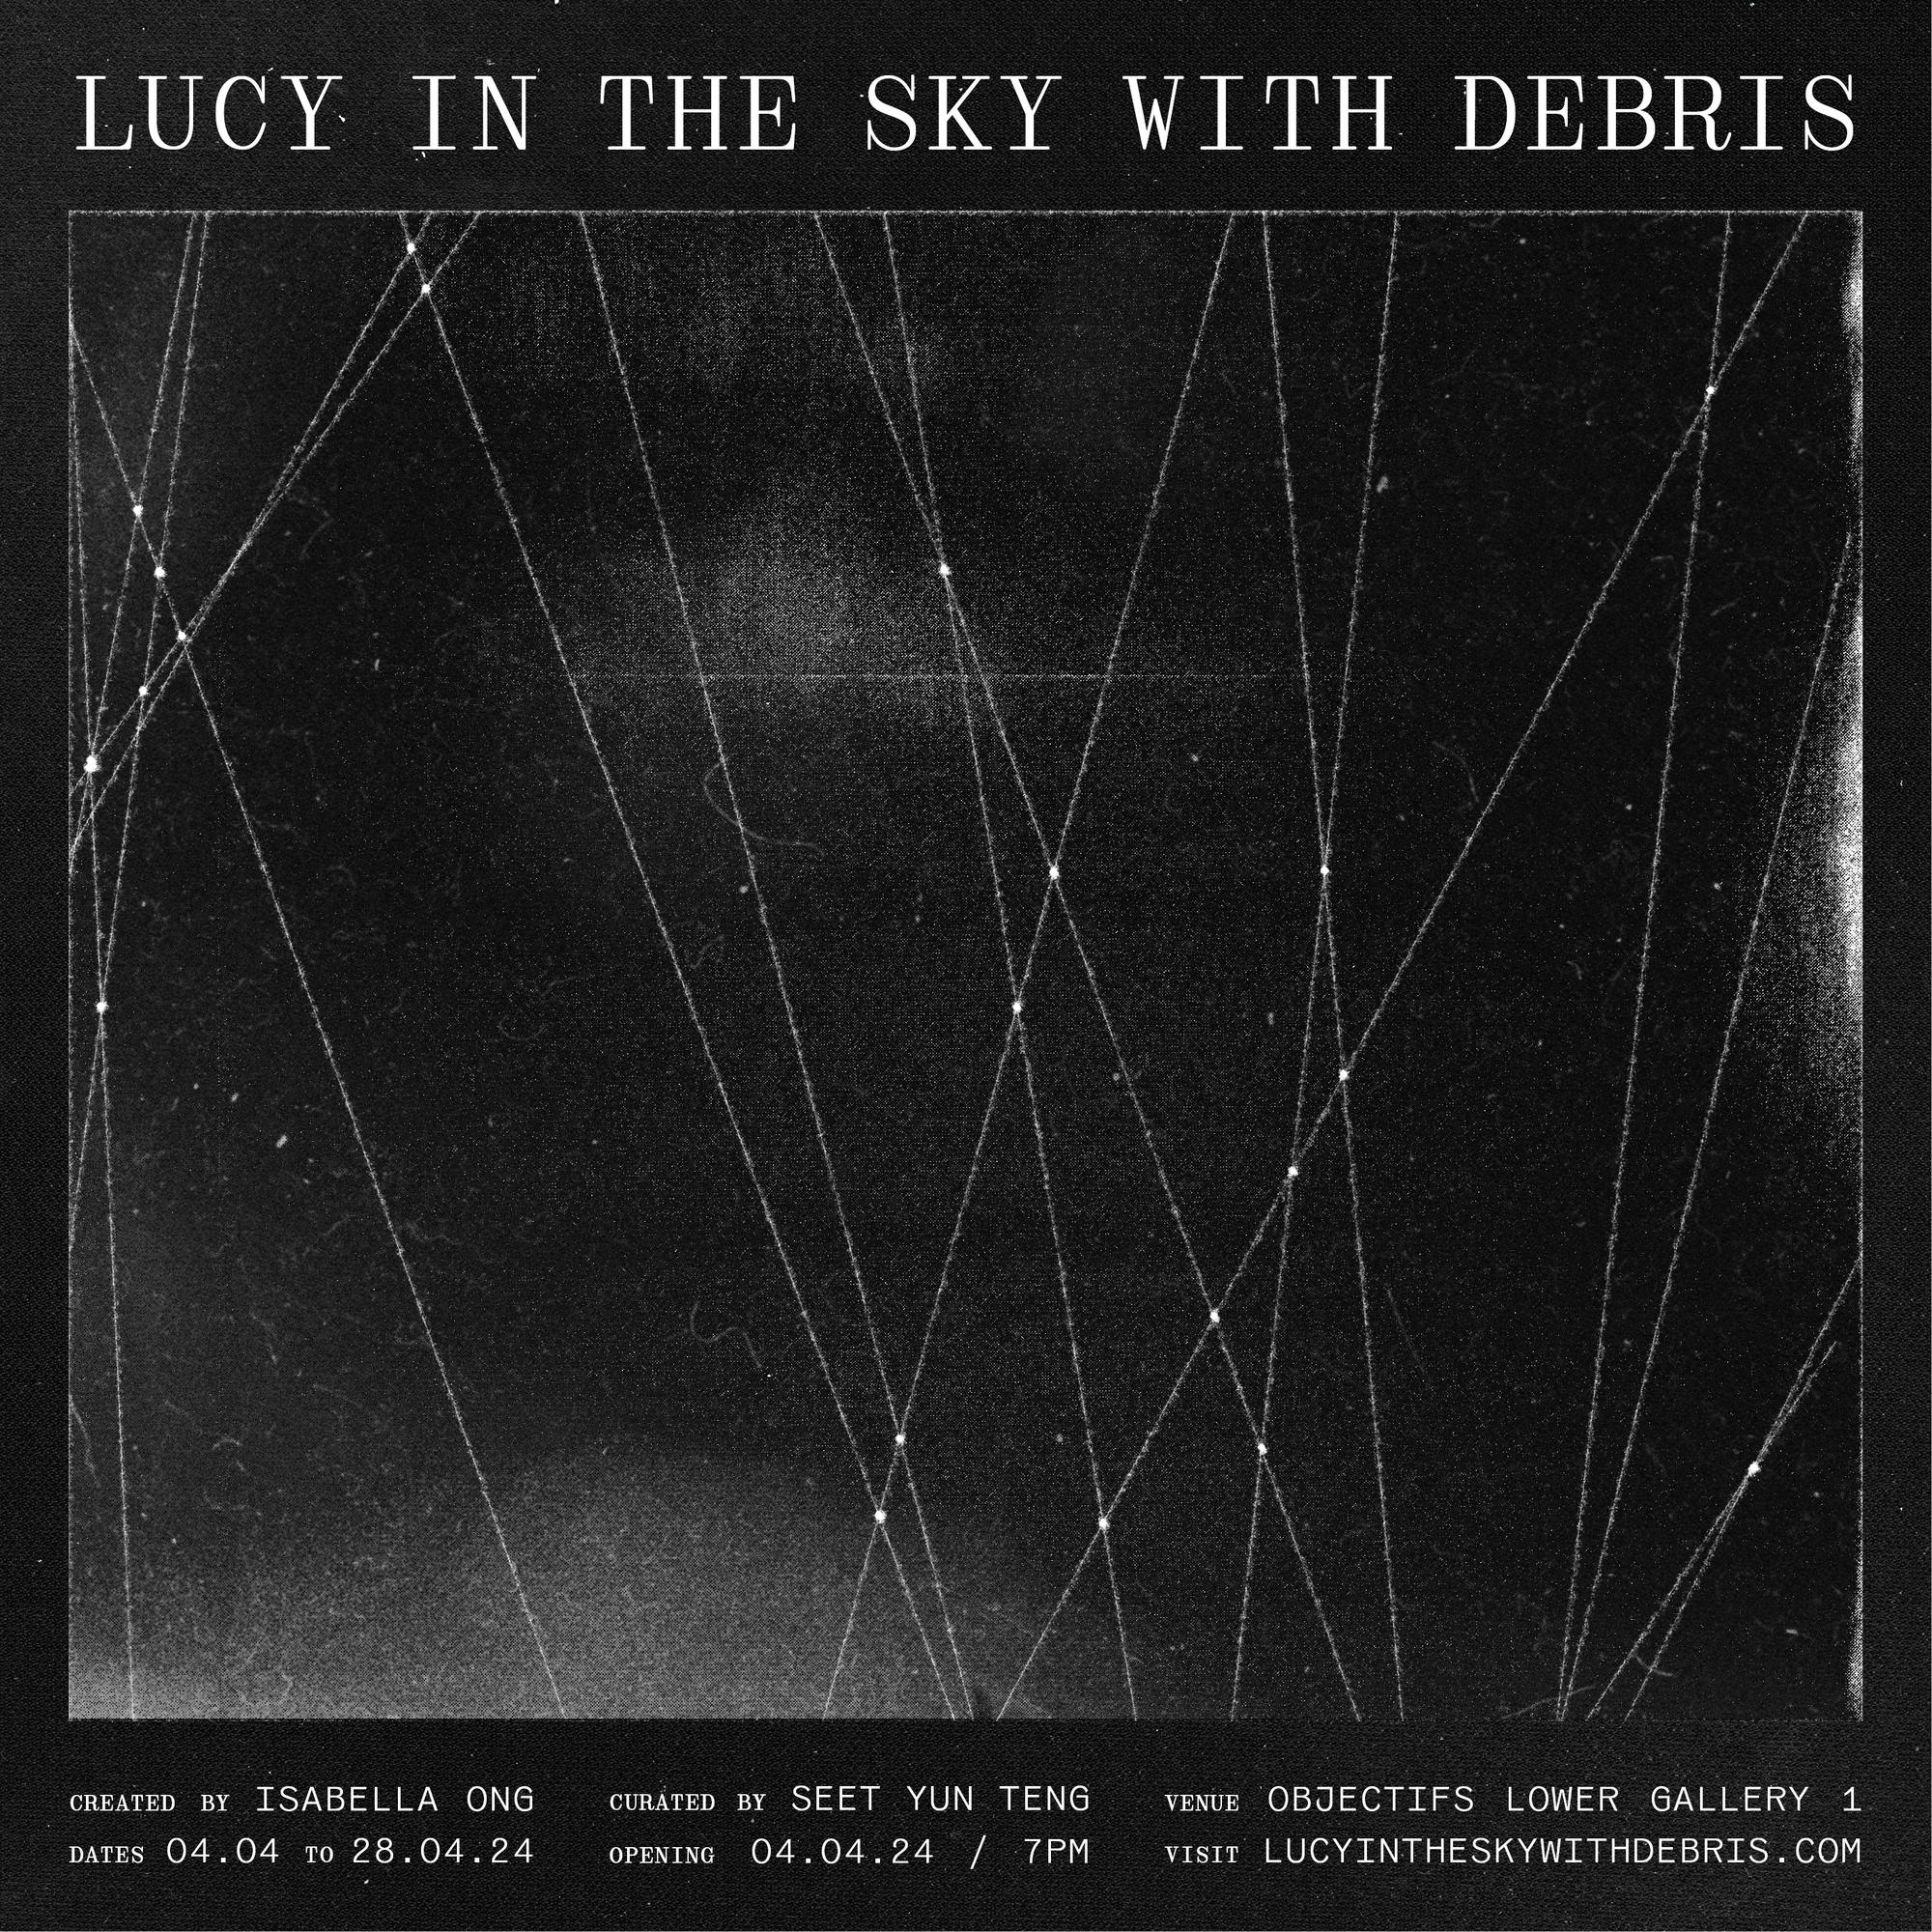 Poster for Lucy in the Sky with Debris